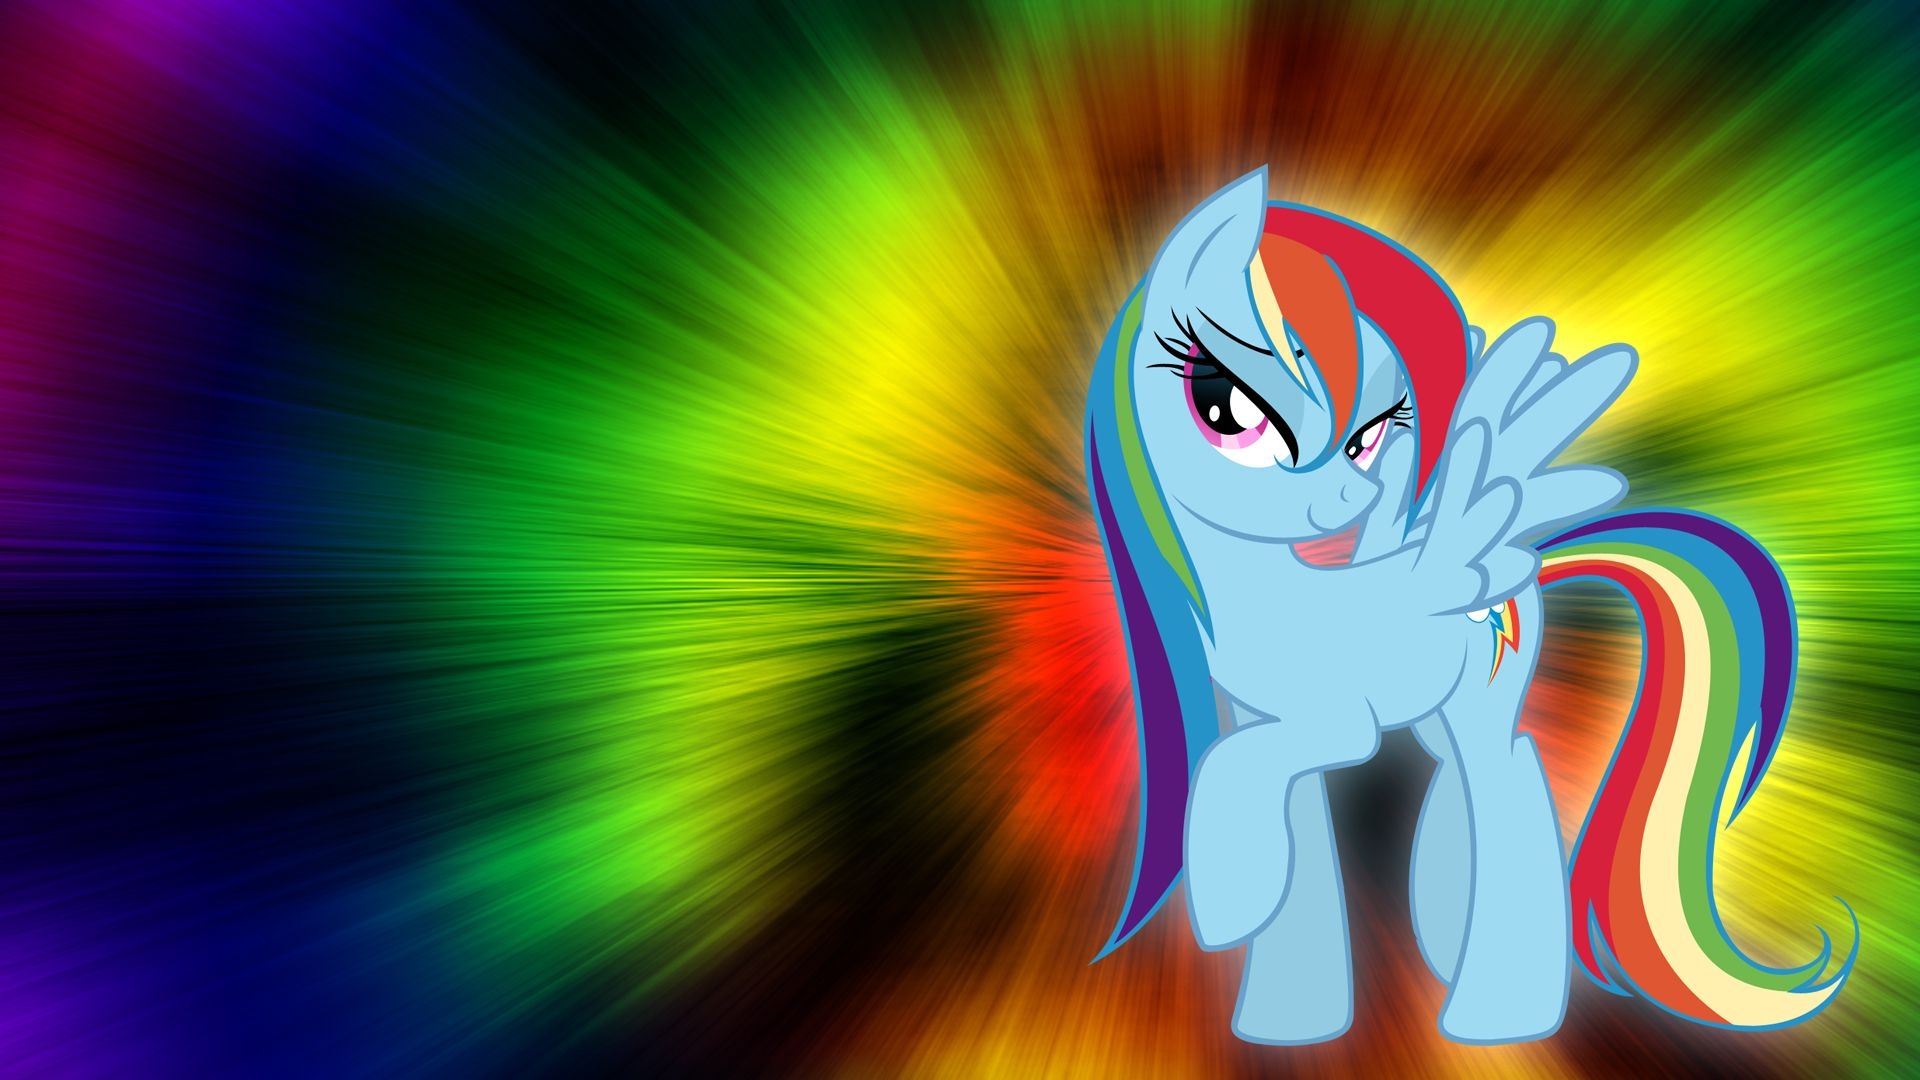 1920x1080 Rainbow Dash Wallpapers HD | Wallpapers, Backgrounds, Images, Art Photos. | Rainbow dash, My little pony wallpaper, Rainbow wallpaper